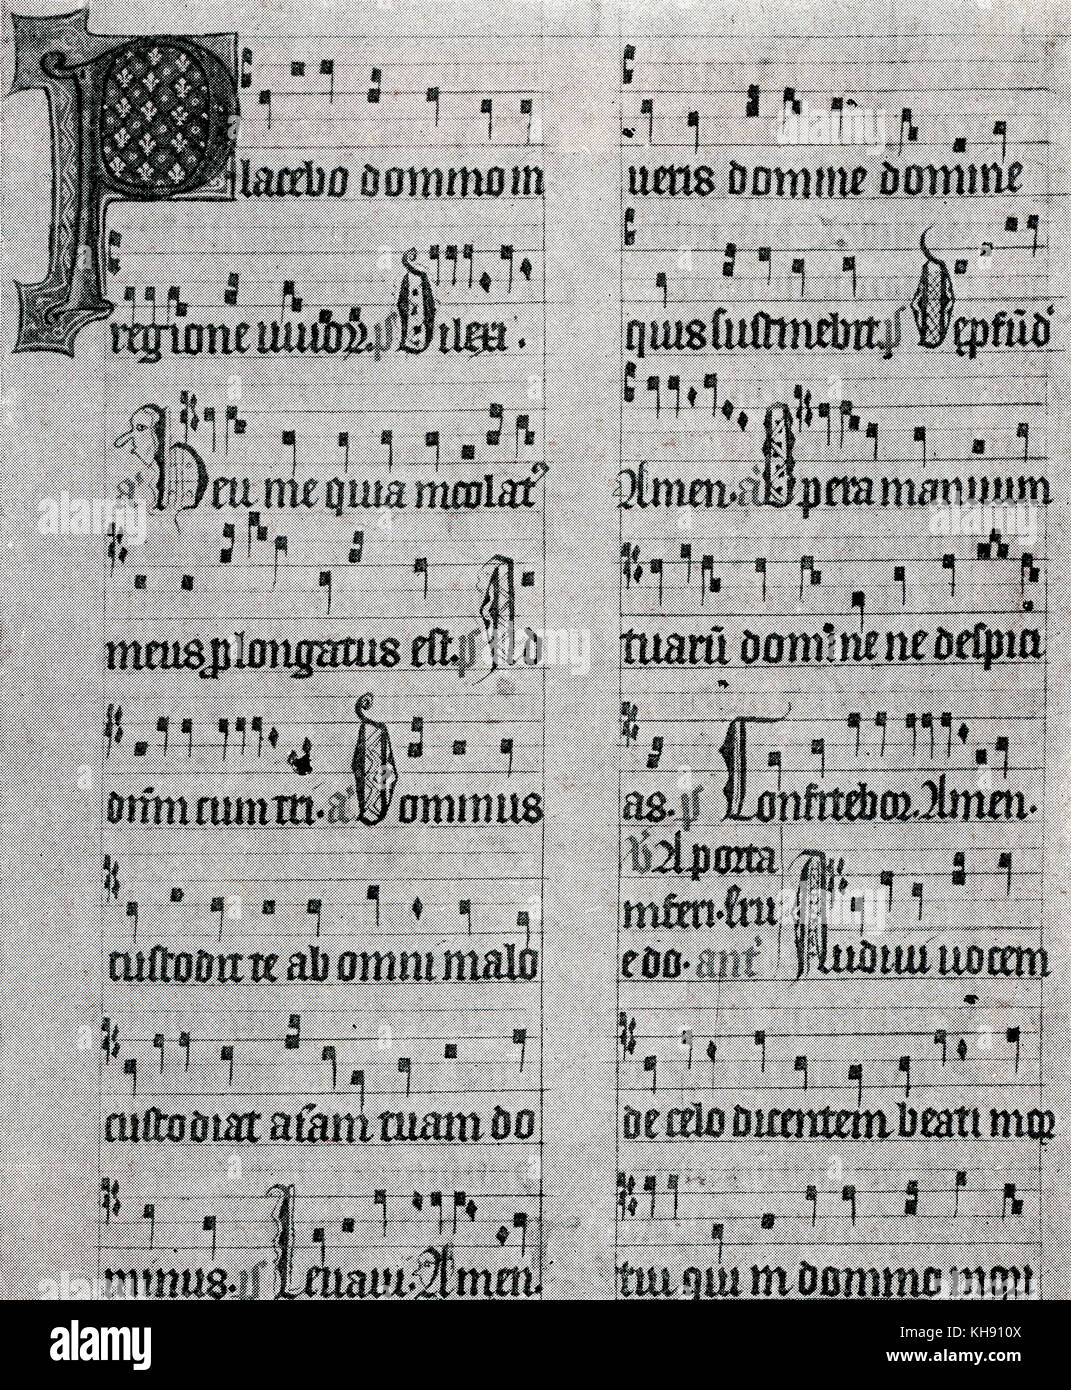 The Arundel Psalter in Roman choral-notation (final phase). Music manuscript of the 14th century. London, British Museum MS.Ar.83. Stock Photo